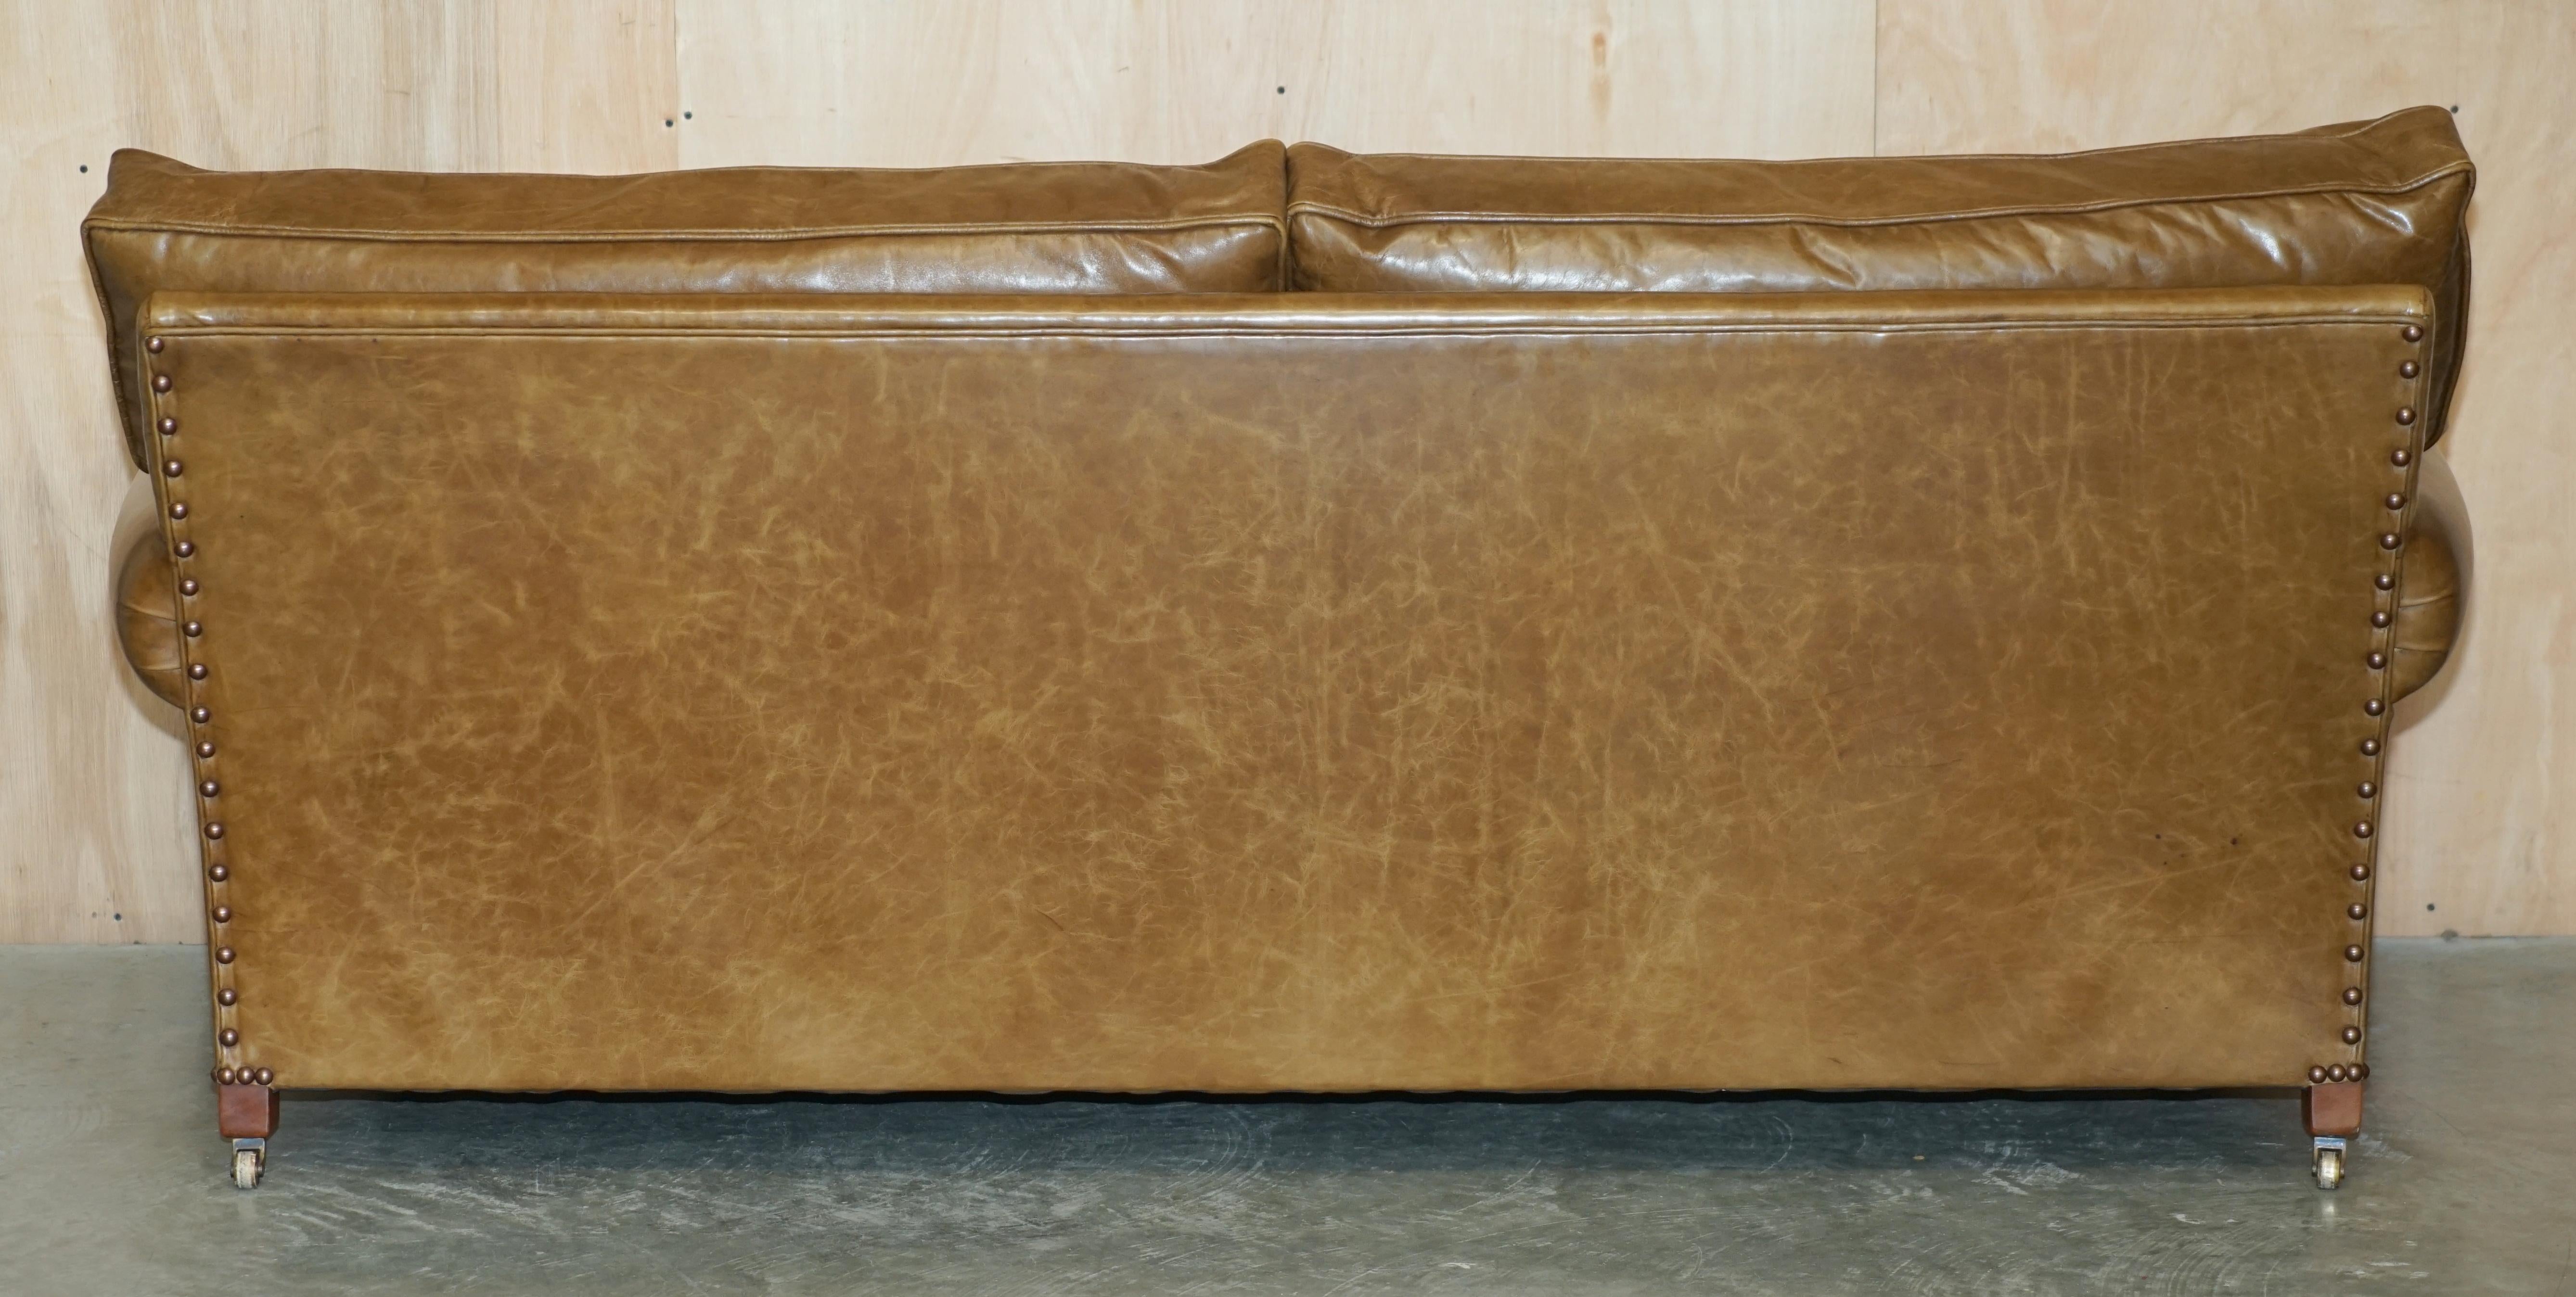 LOVELY GEORGE SMITH SCROLL CUSHiON BACK BROWN LEATHER SOFA en vente 11